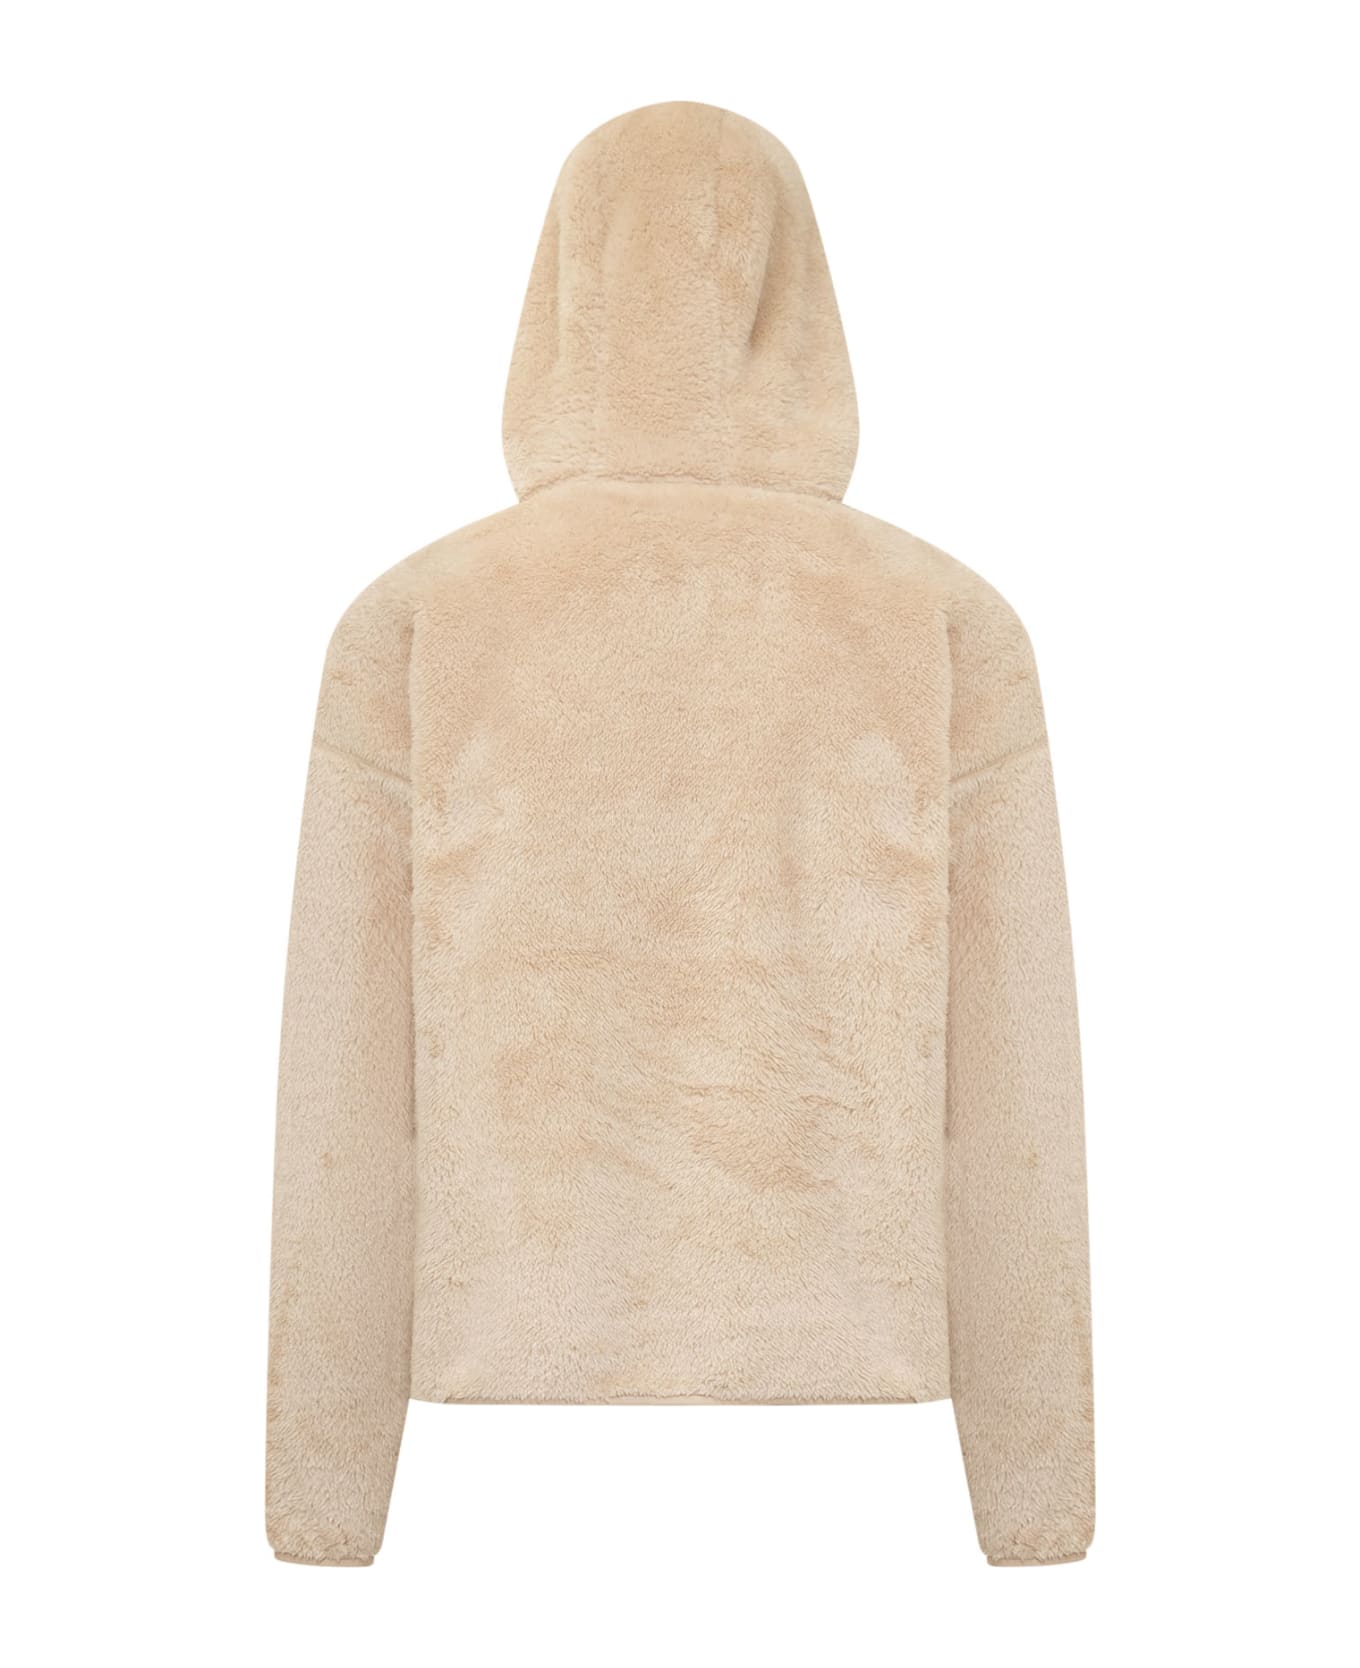 Kidsuper Hoodie With Embroidery - CREAM